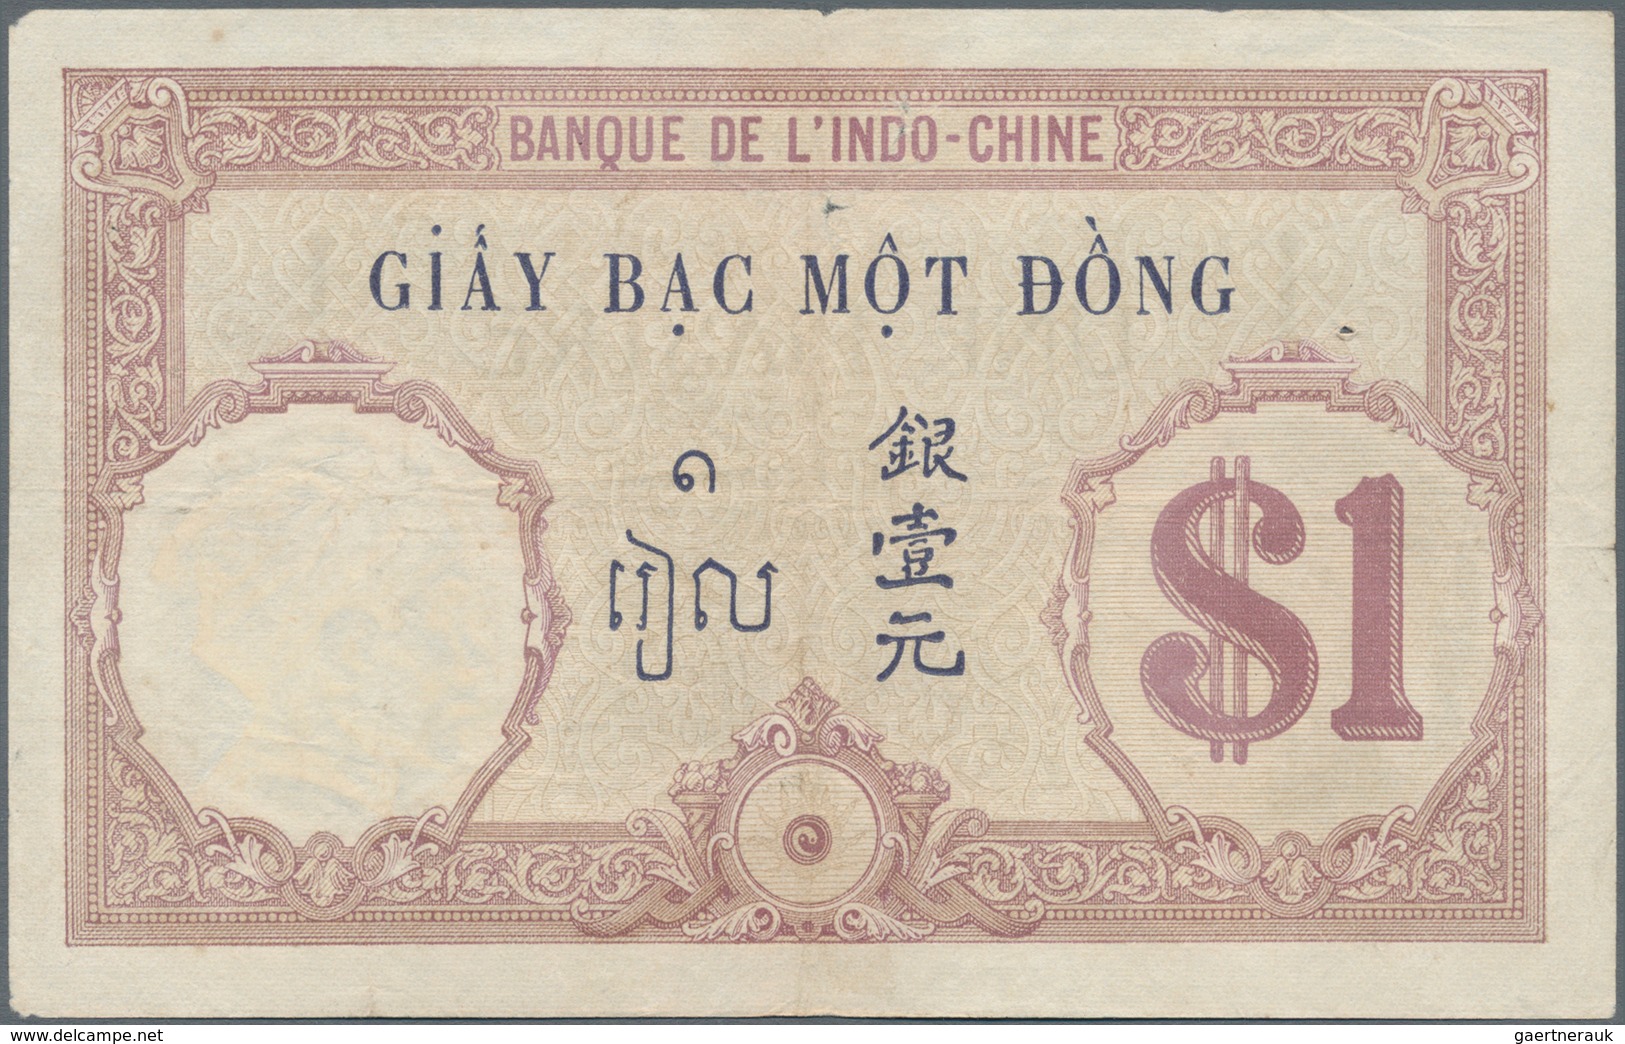 French Indochina / Französisch Indochina: Banque de l'Indo-Chine set with 6 banknotes of the ND(1921